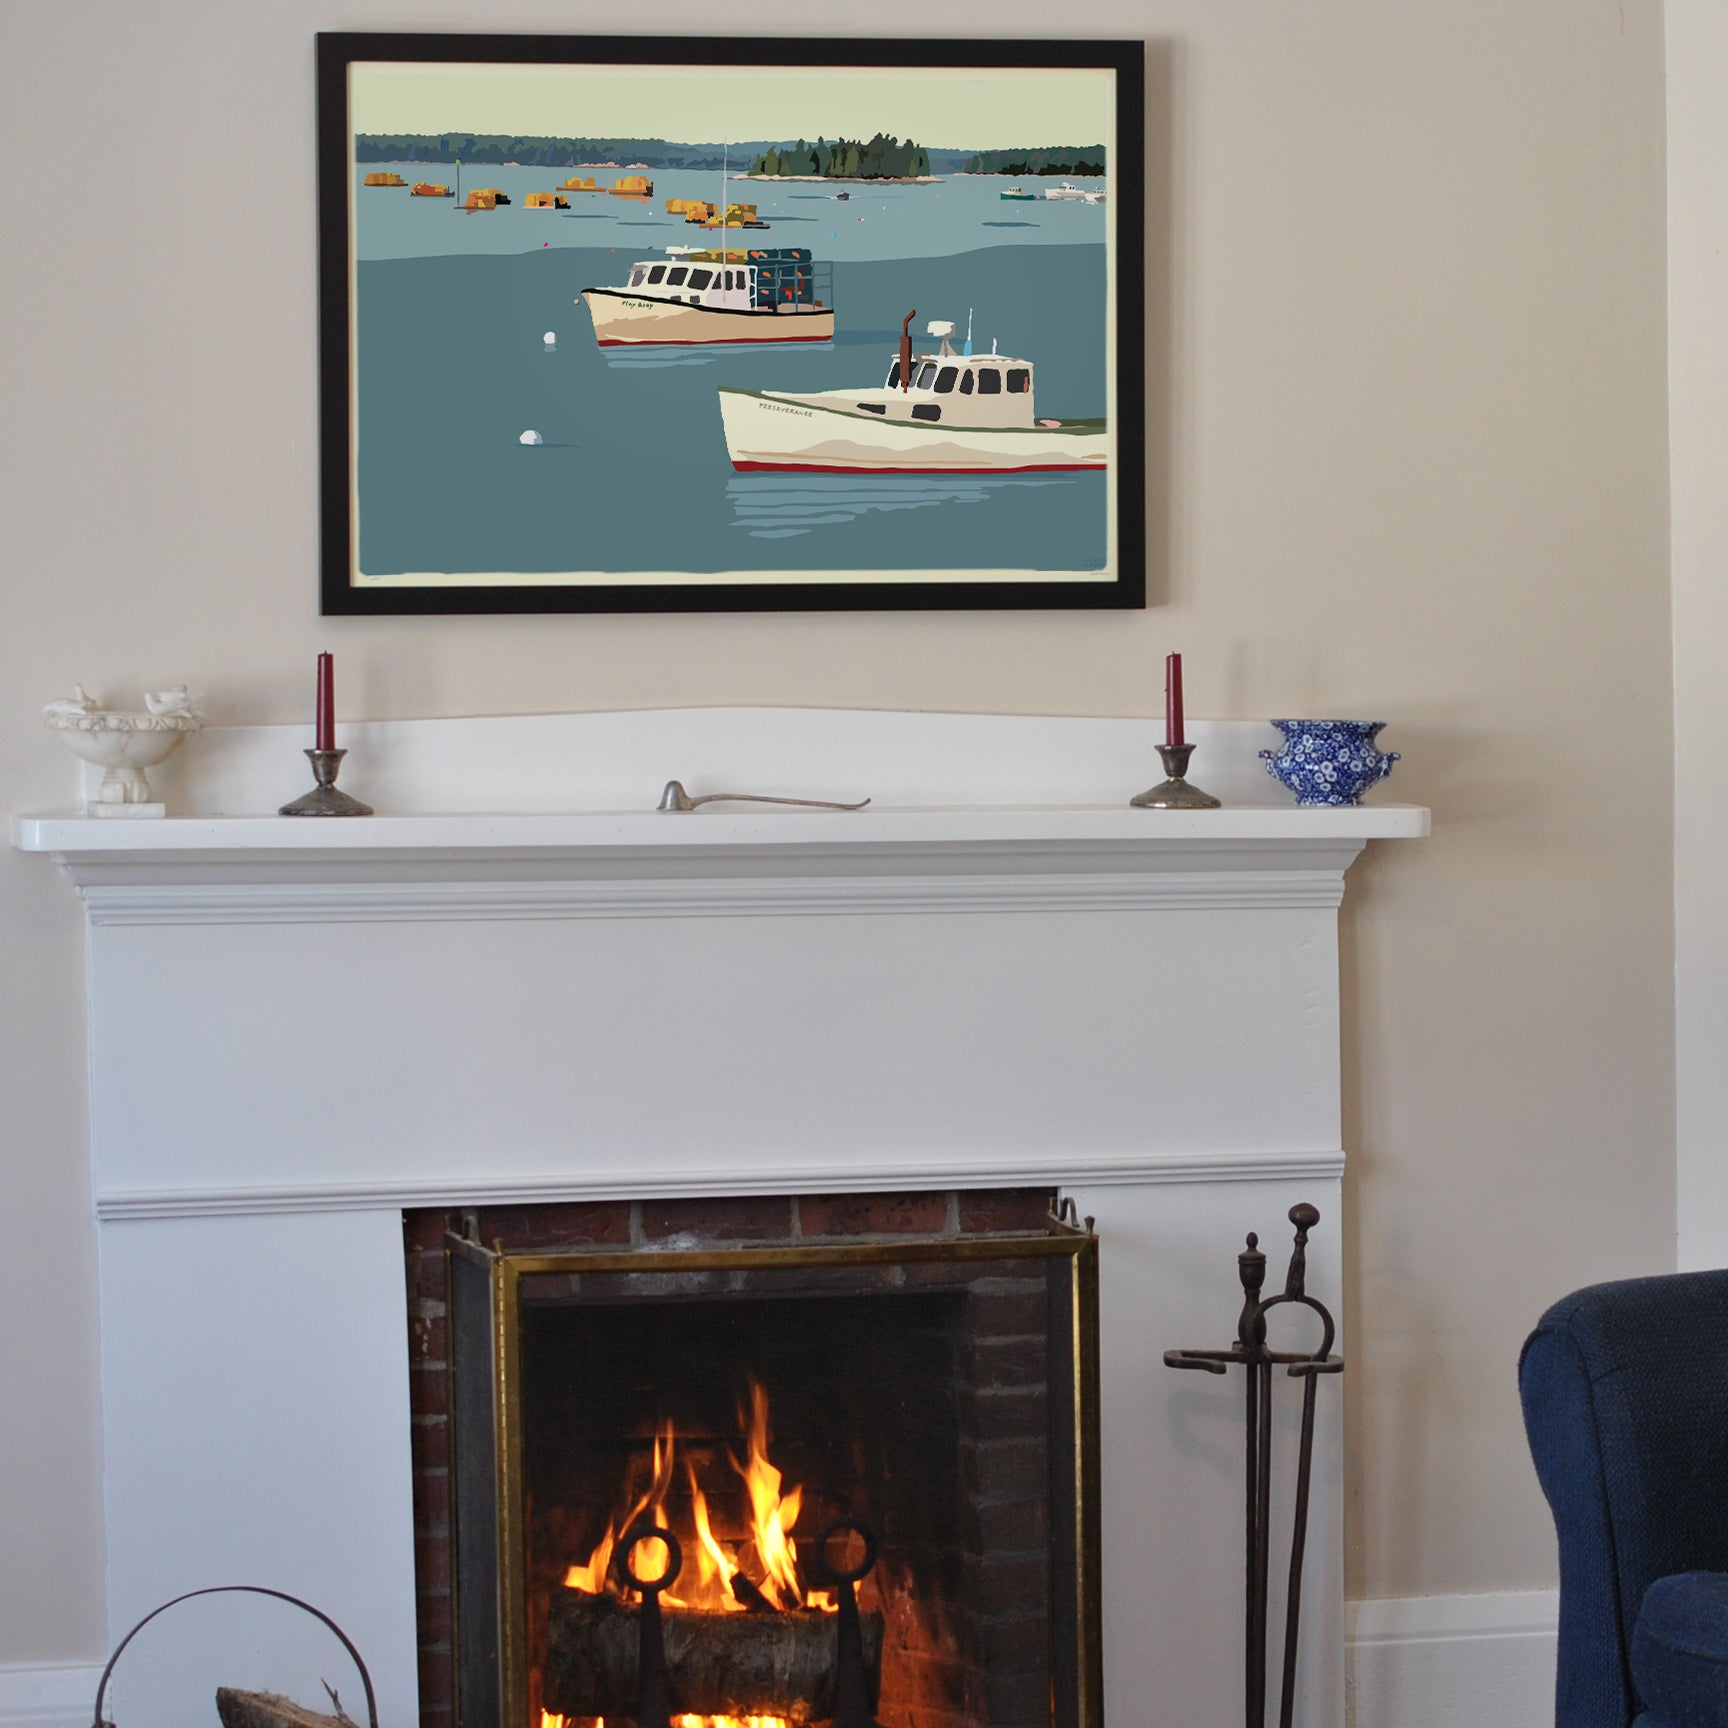 Lobster Boats in Friendship Art Print 24" x 36" Framed Wall Poster By Alan Claude - Maine